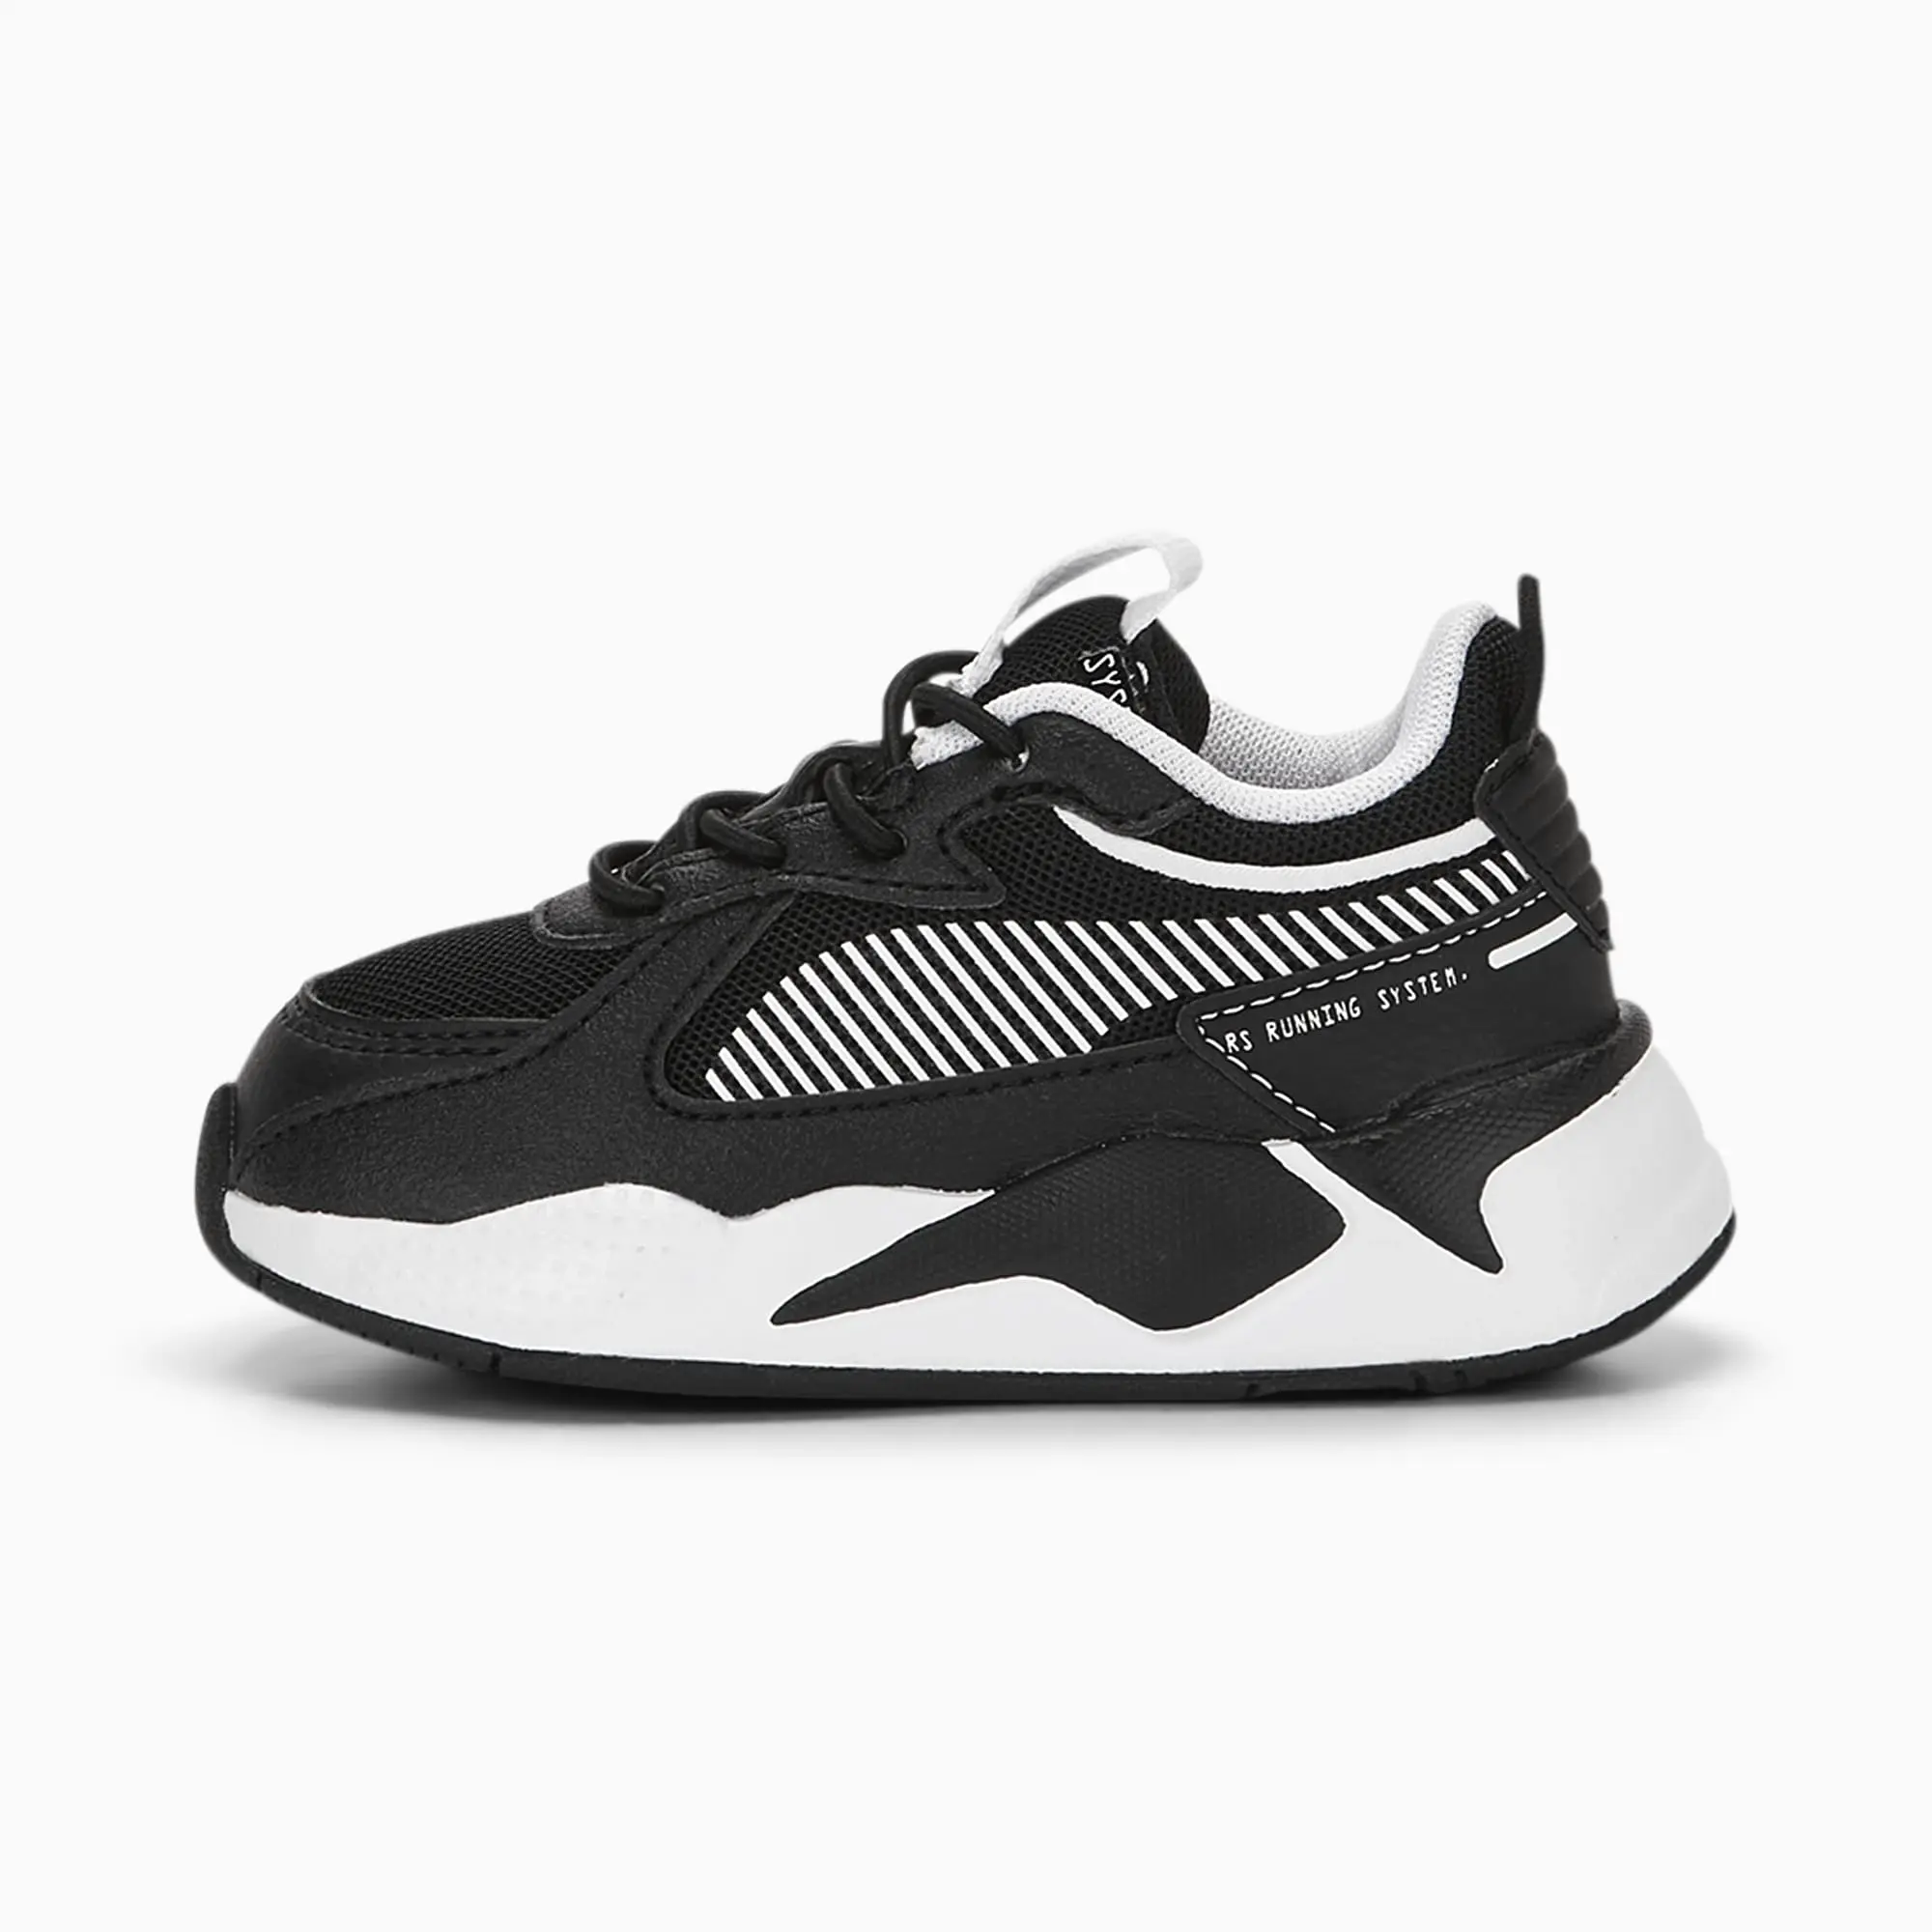 PUMA RS-X Sneakers Toddlers, Black/White